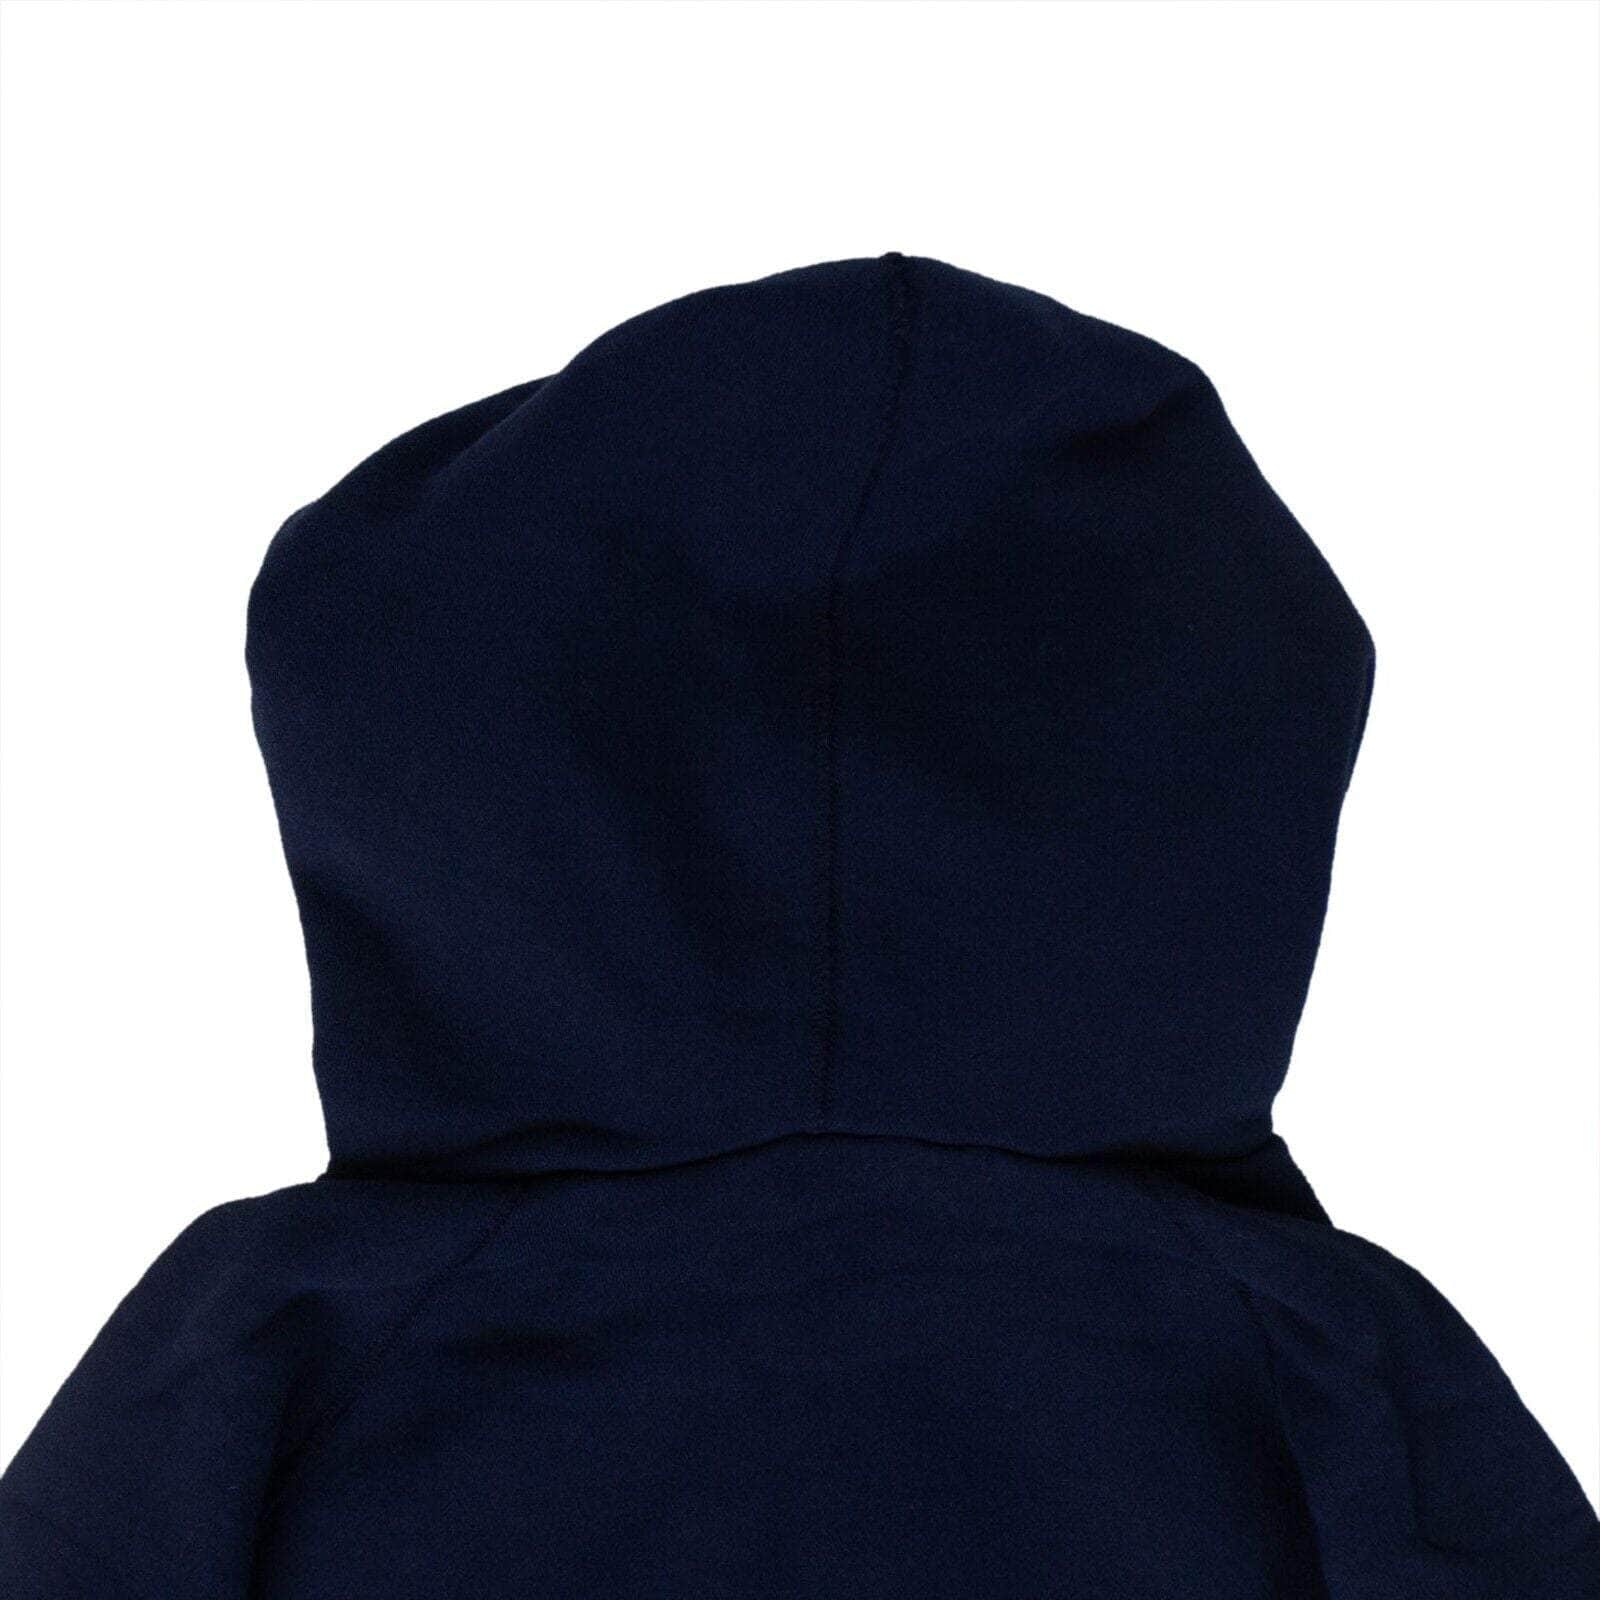 DENIM BY VANQUISH & FRAGMENT channelenable-all, chicmi, couponcollection, denim-by-vanquish-fragment, gender-mens, main-clothing, mens-shoes, size-l, size-m, under-250 Navy Blue Chest Logo Hoodie